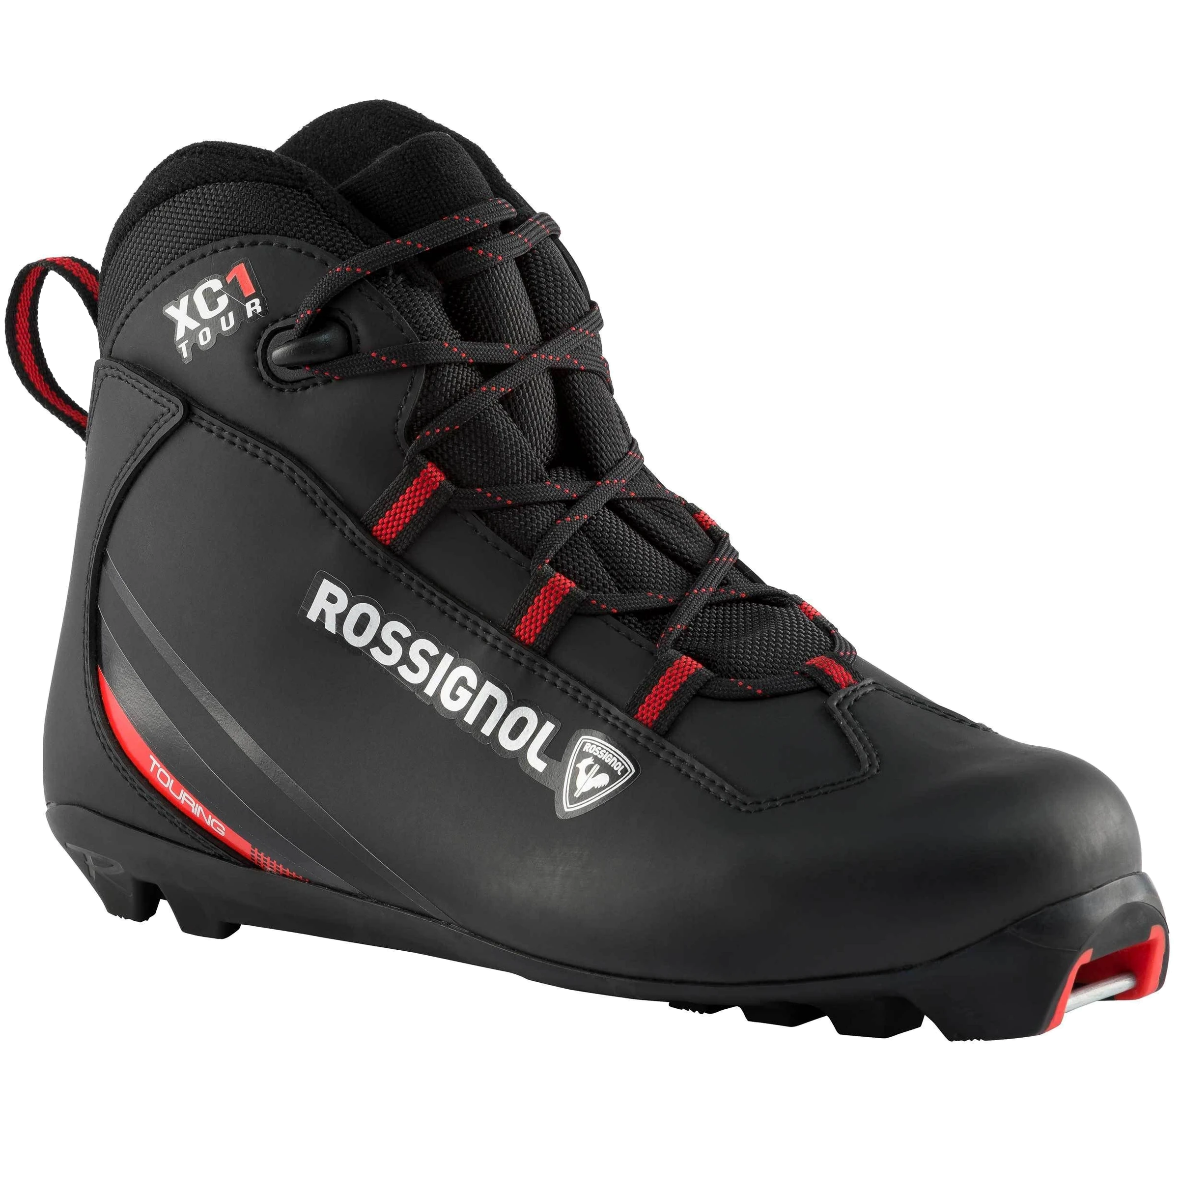 Rossignol Touring Nordic Boots X-1 *SALE*